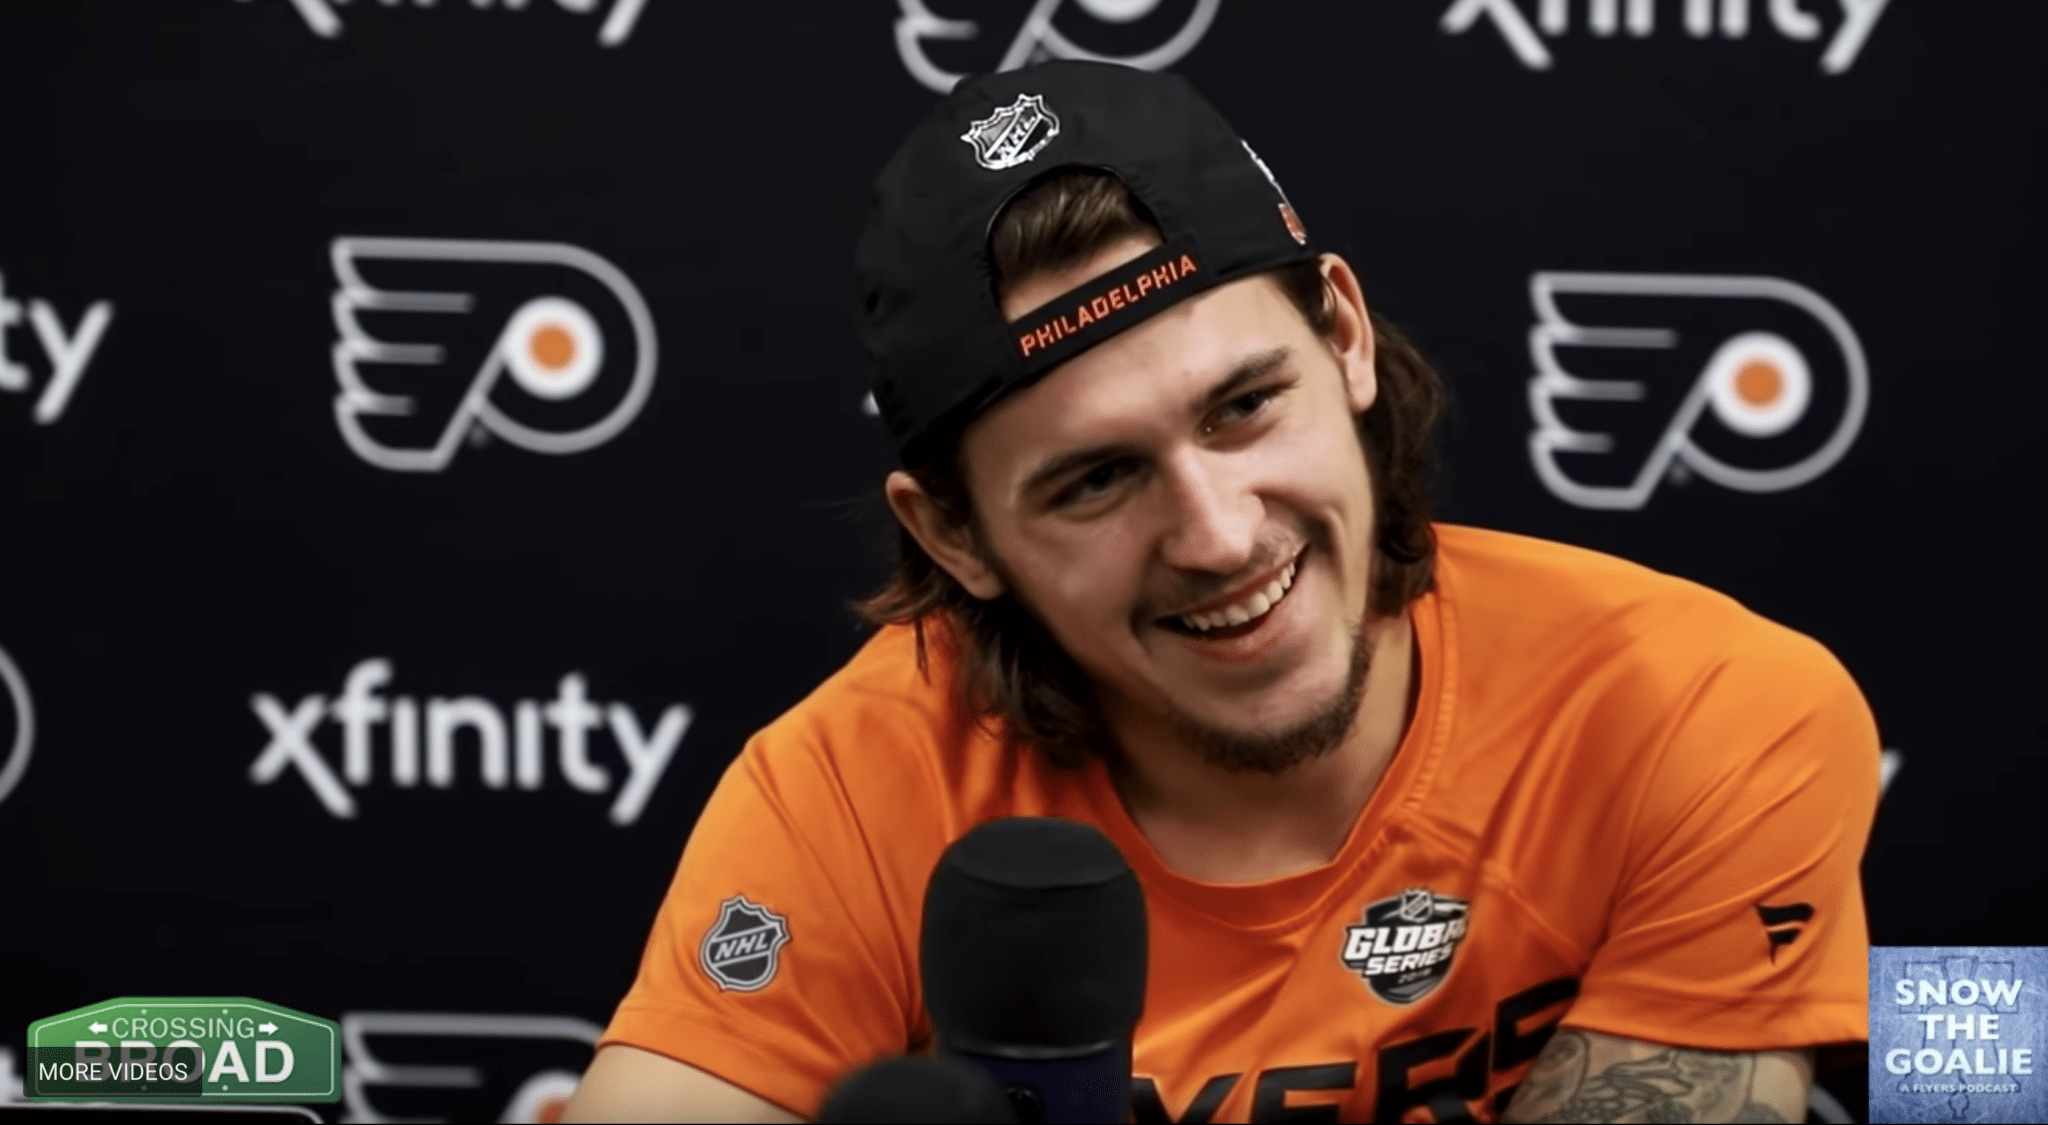 NHL All-Star Travis Konecny Opens Up About His Breakout Season, Playing with a Contract, Chirping at Opponents, and More